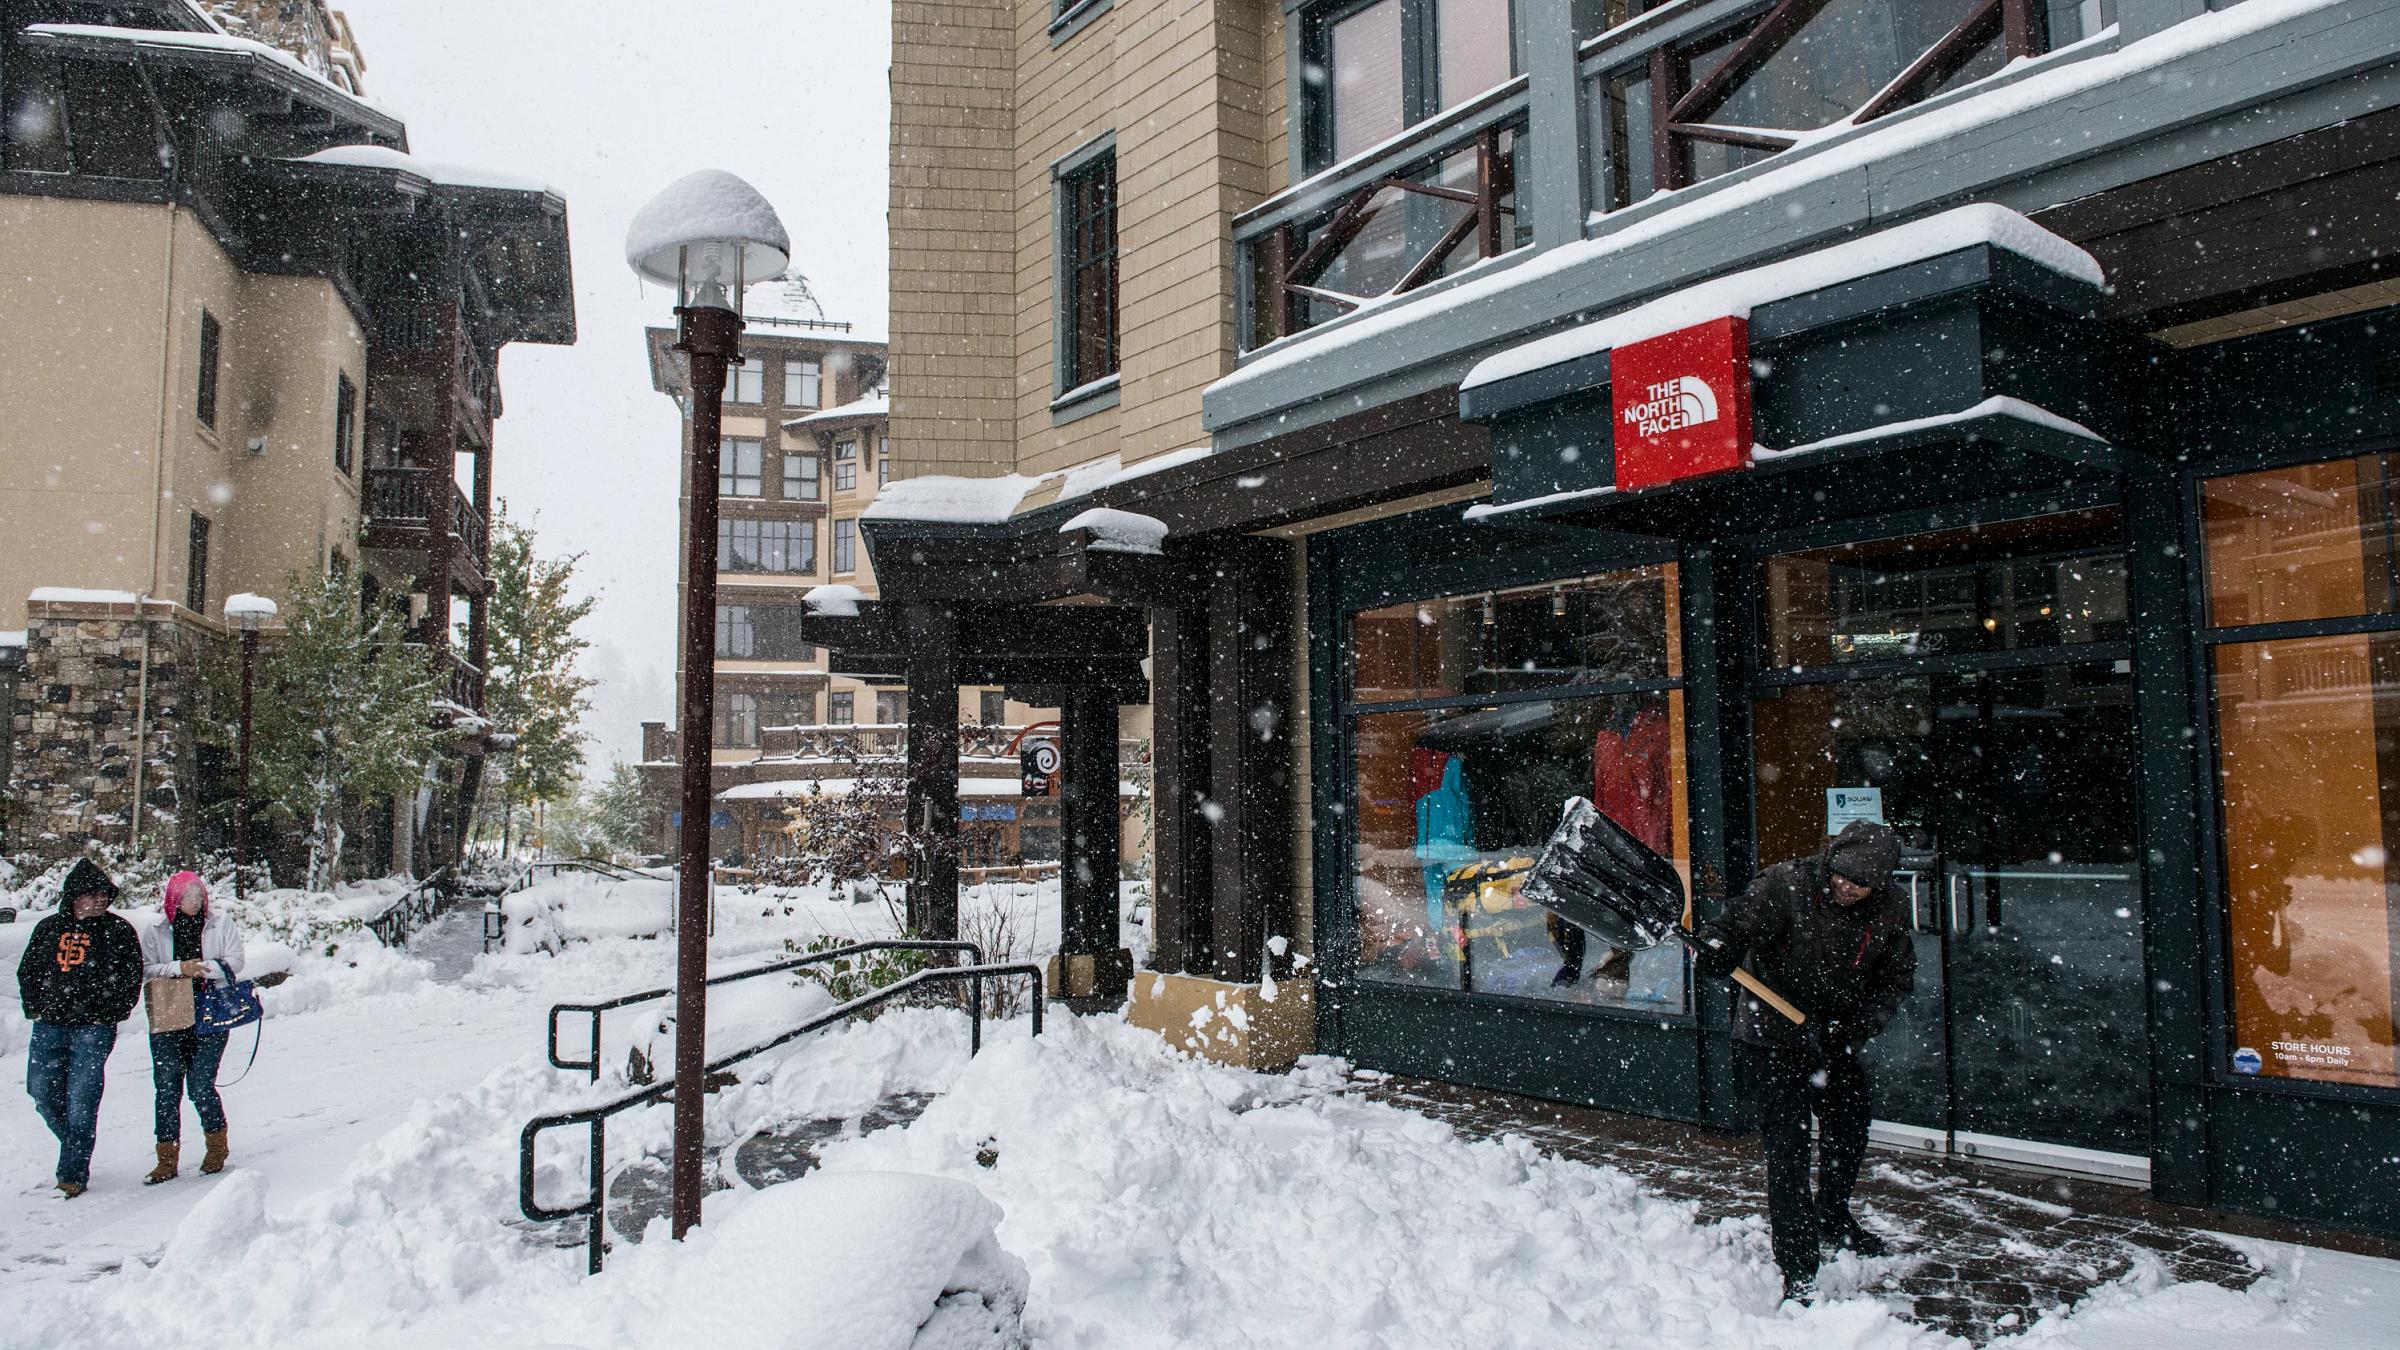 The North Face store in the Village at Squaw Valley